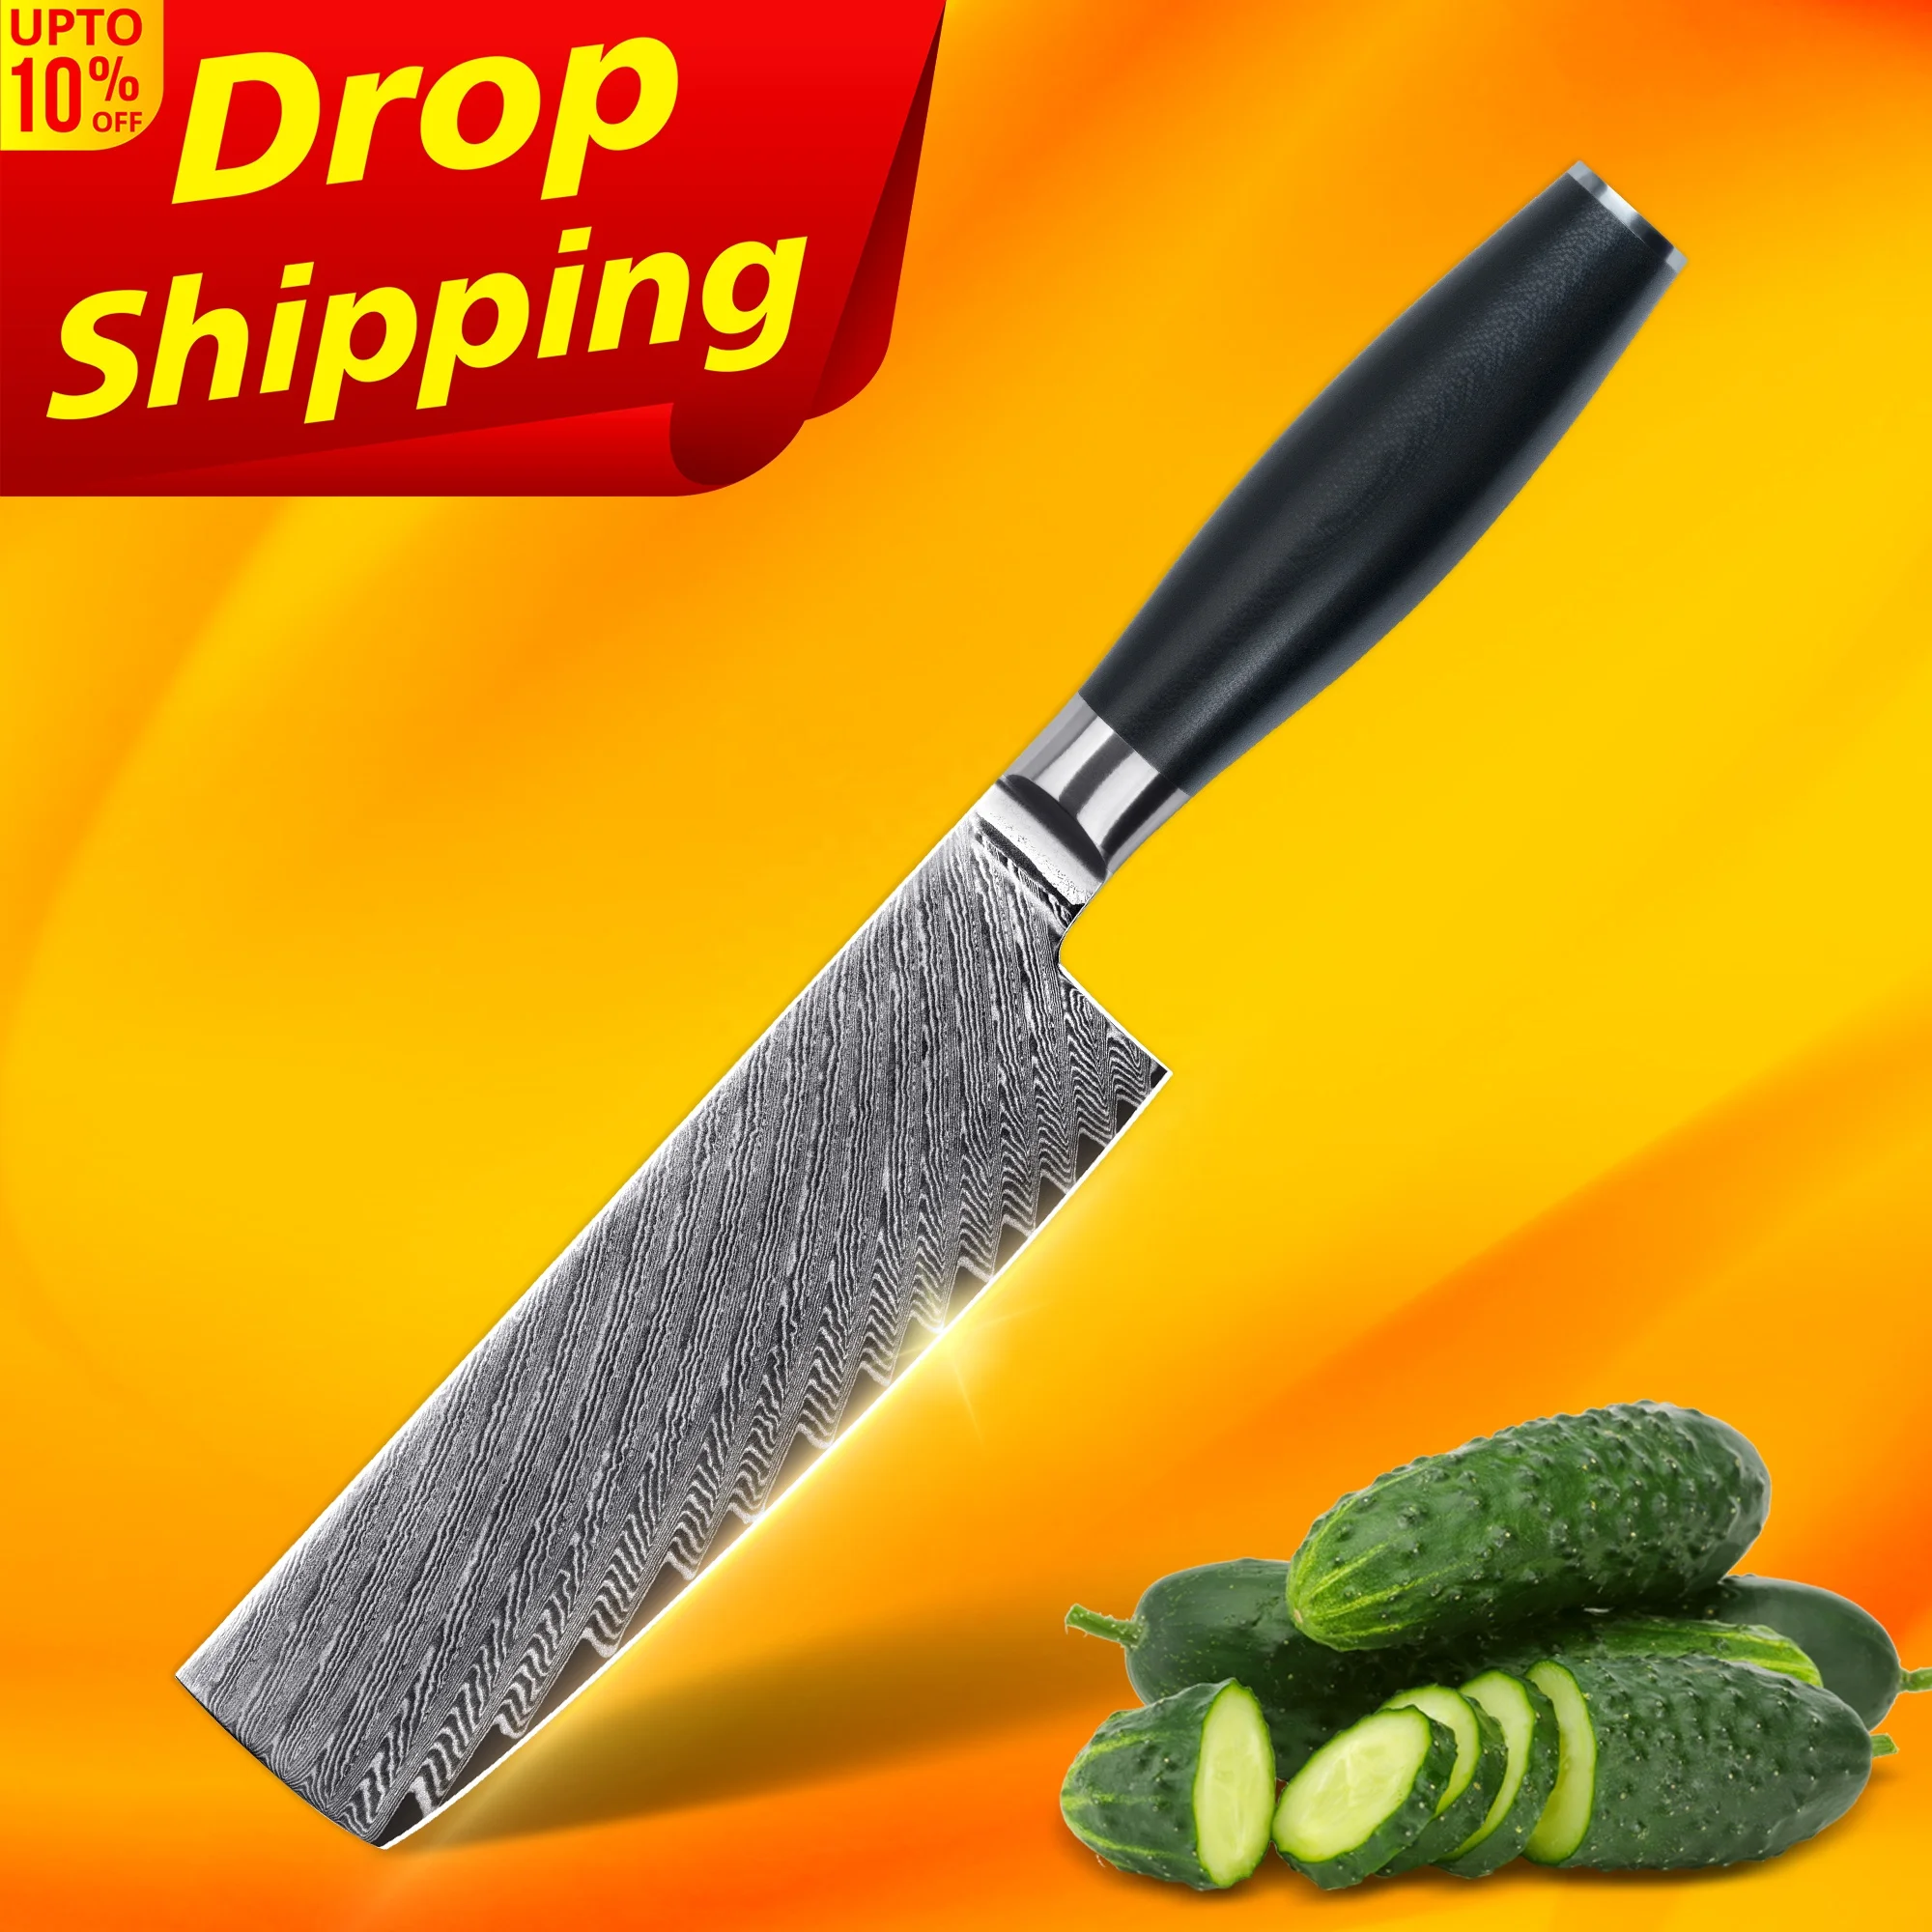 

10% off SkyCook 7 nakiri knife damascus chef vg10 chef's knives knife blanks damascus steel With G10 Handle